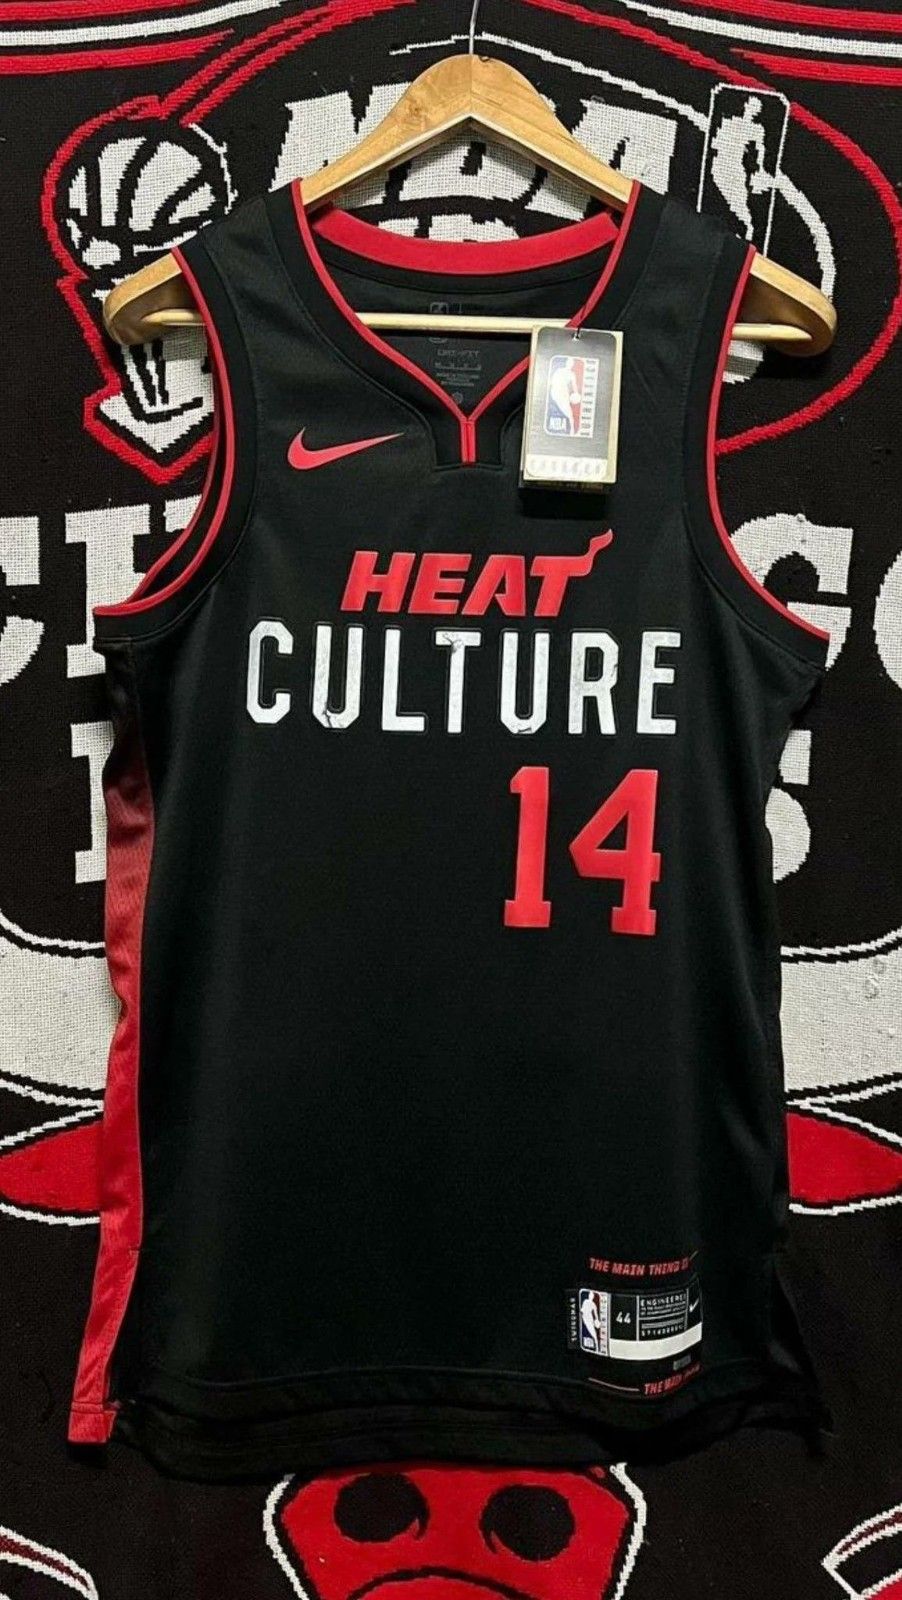 Did a bunch of new 2022-23 NBA jerseys just leak online? – NBC